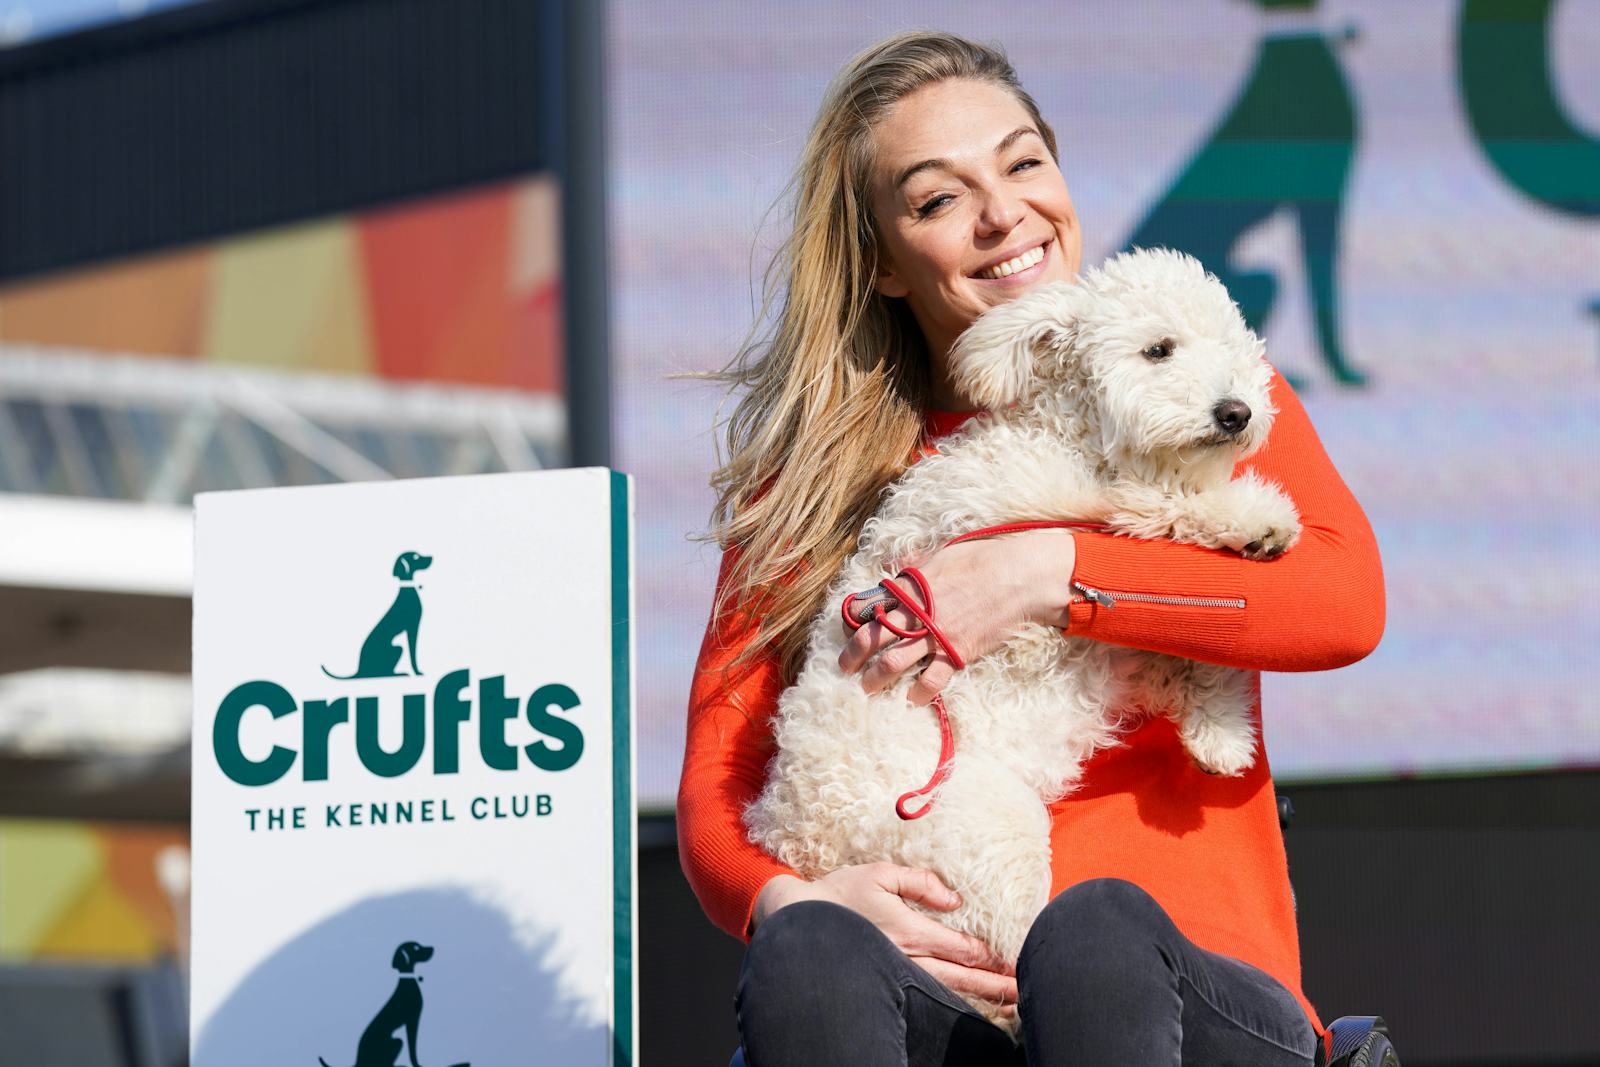 Who Is New Crufts Presenter Sophie